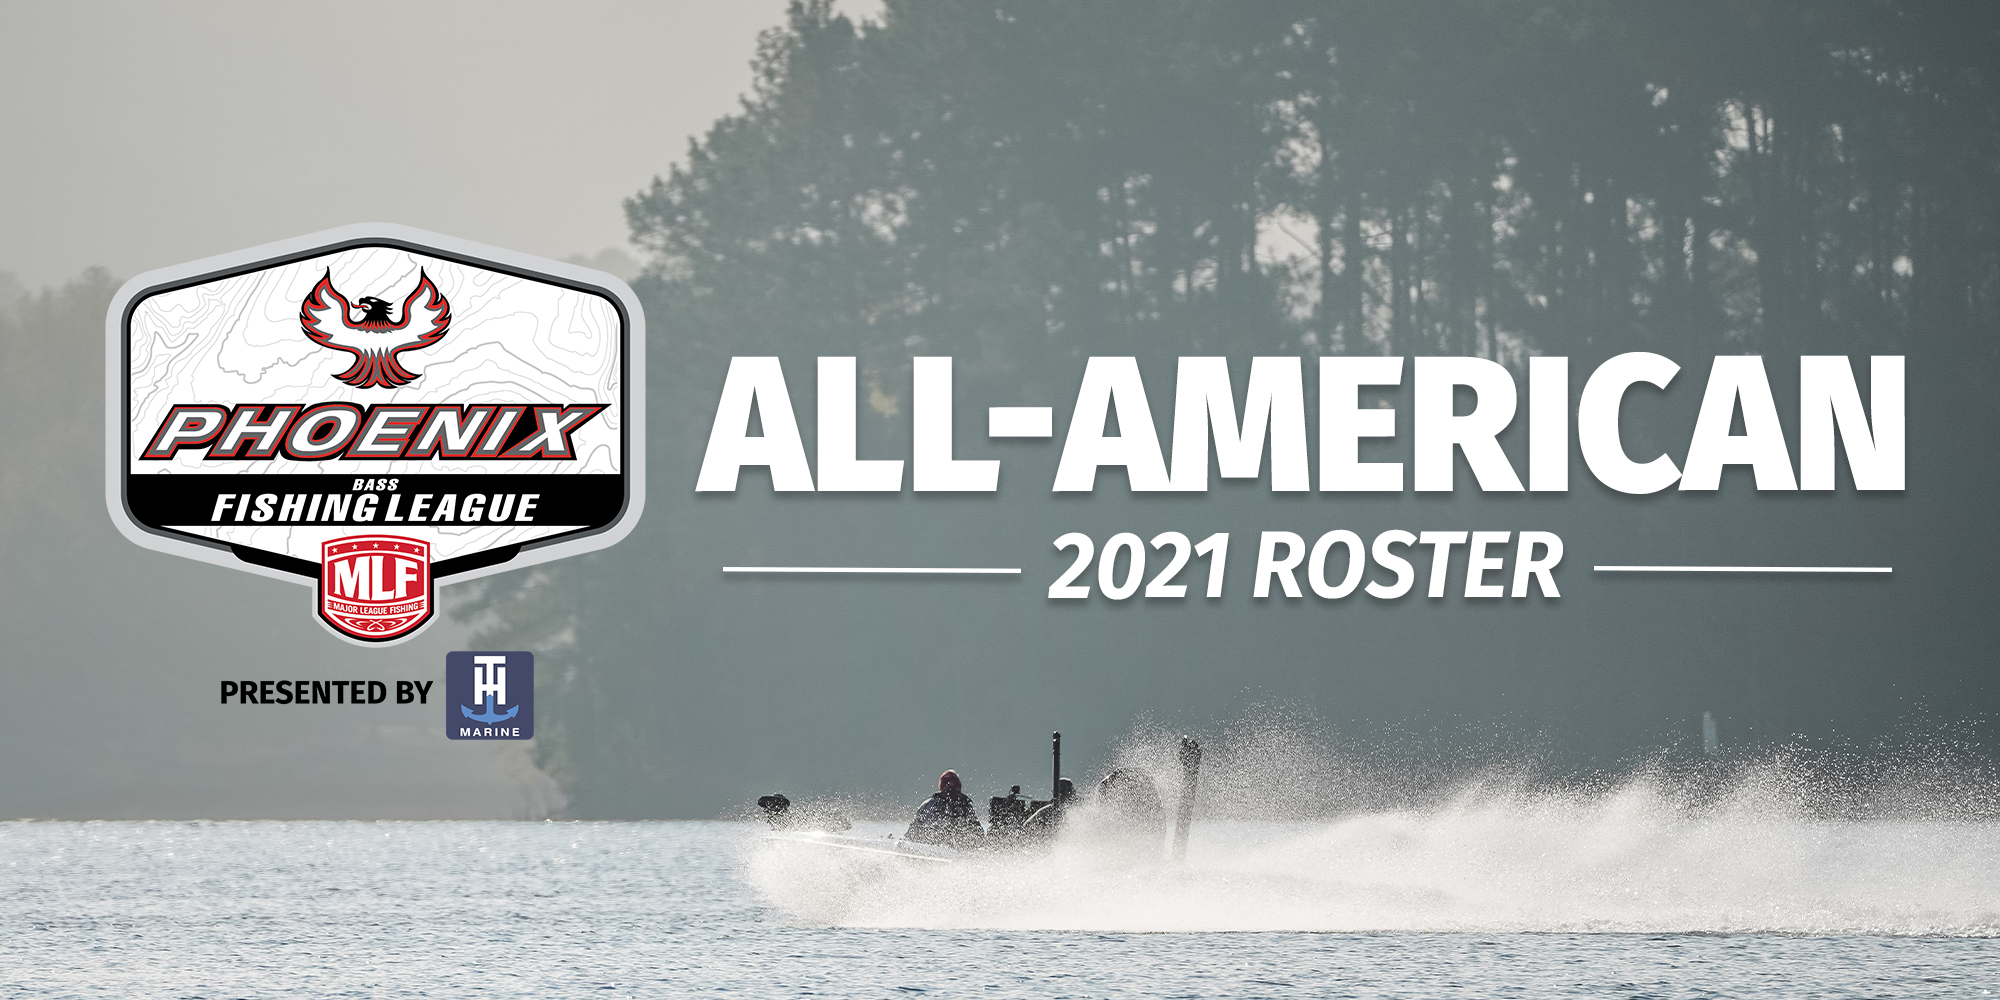 See the 2021 All-American Roster - Major League Fishing